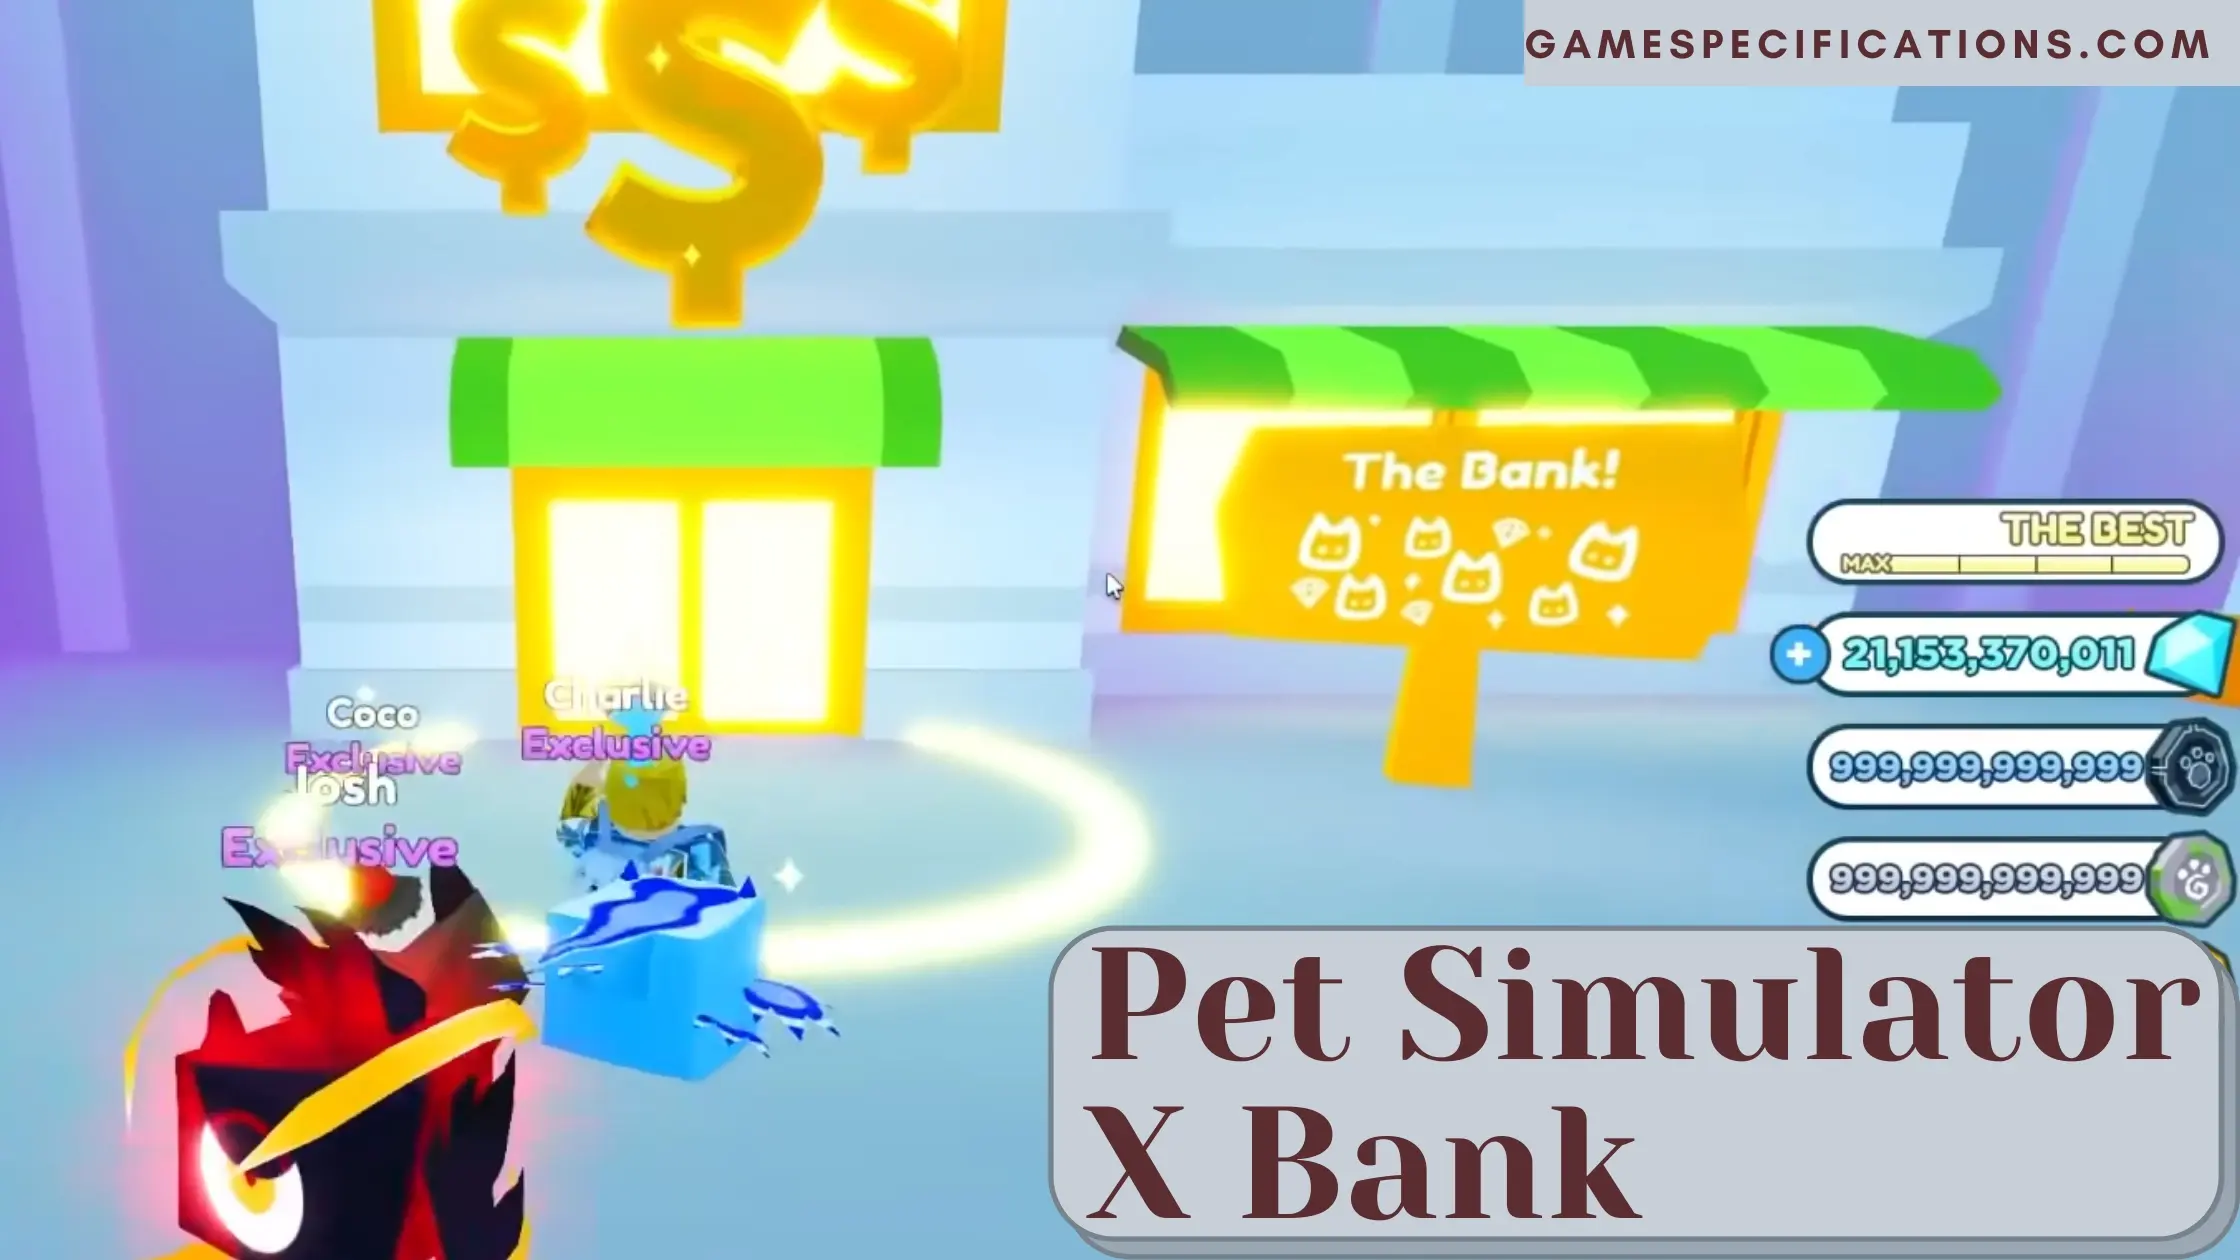 Pet Simulator X Bank: All You Need To Know